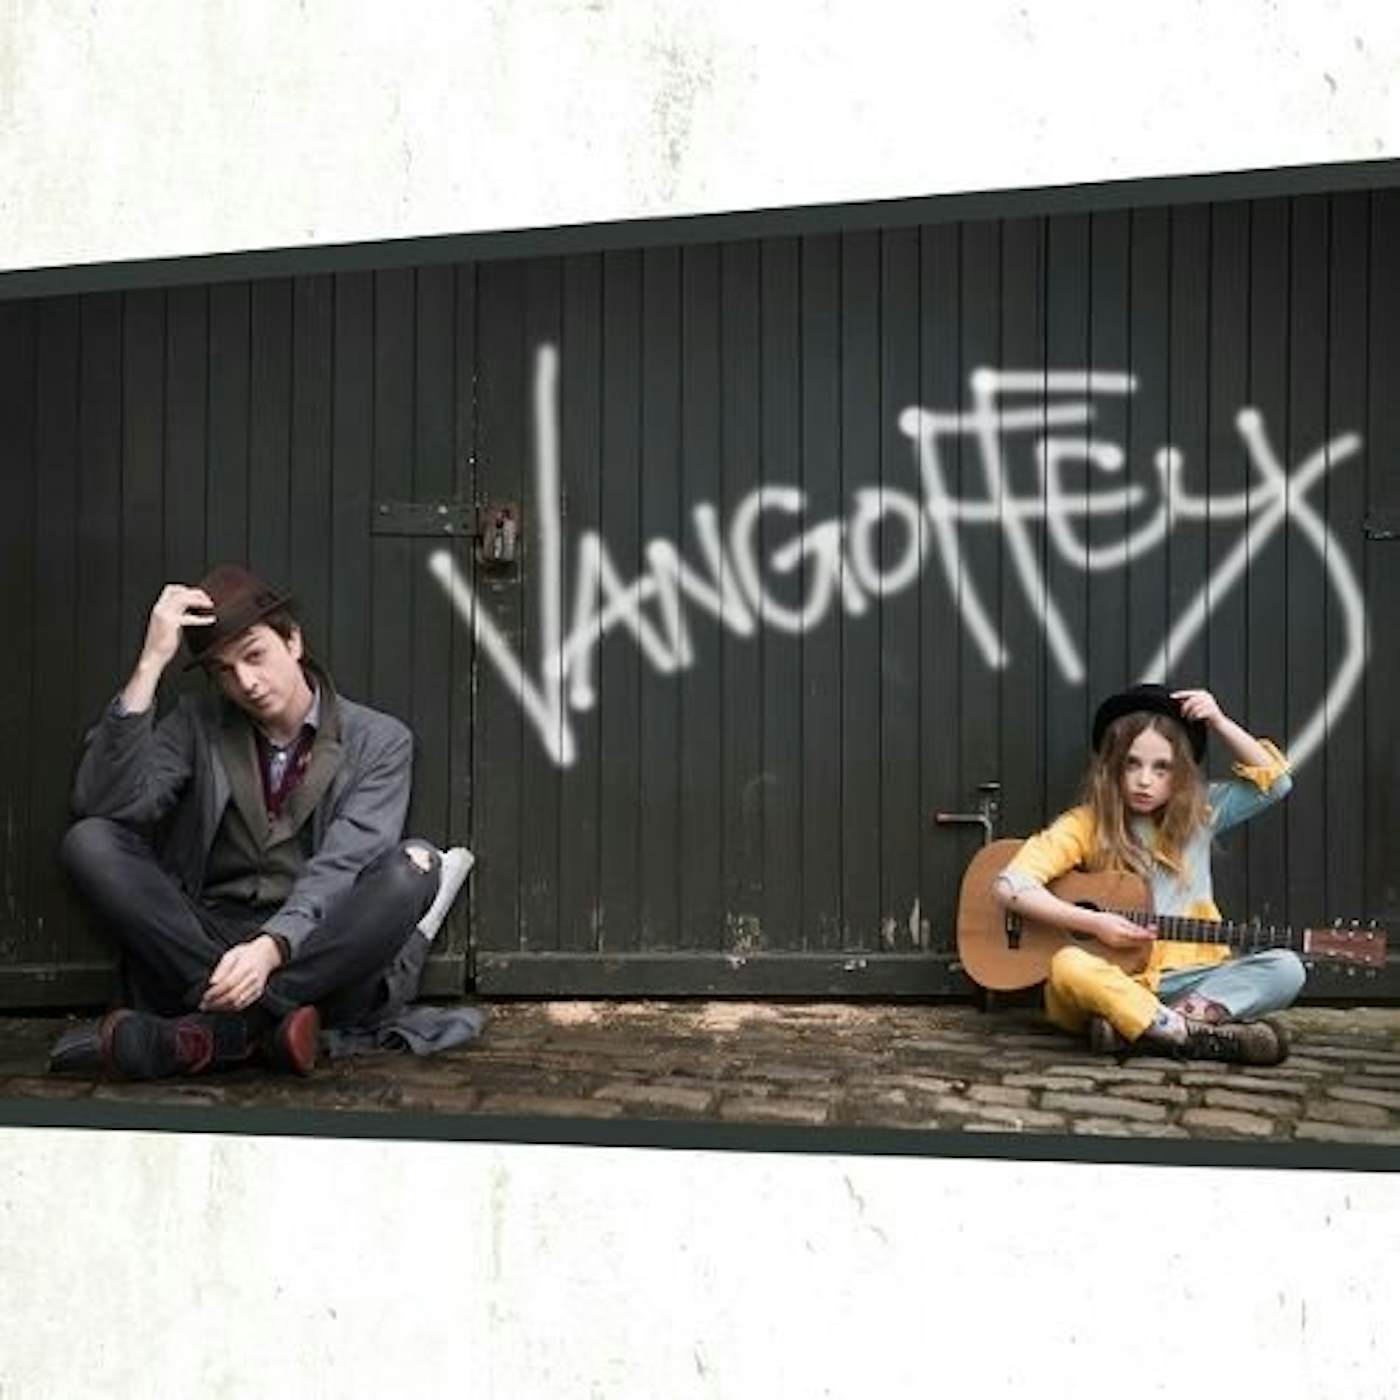 vangoffey Take your jacket off & get into it Vinyl Record